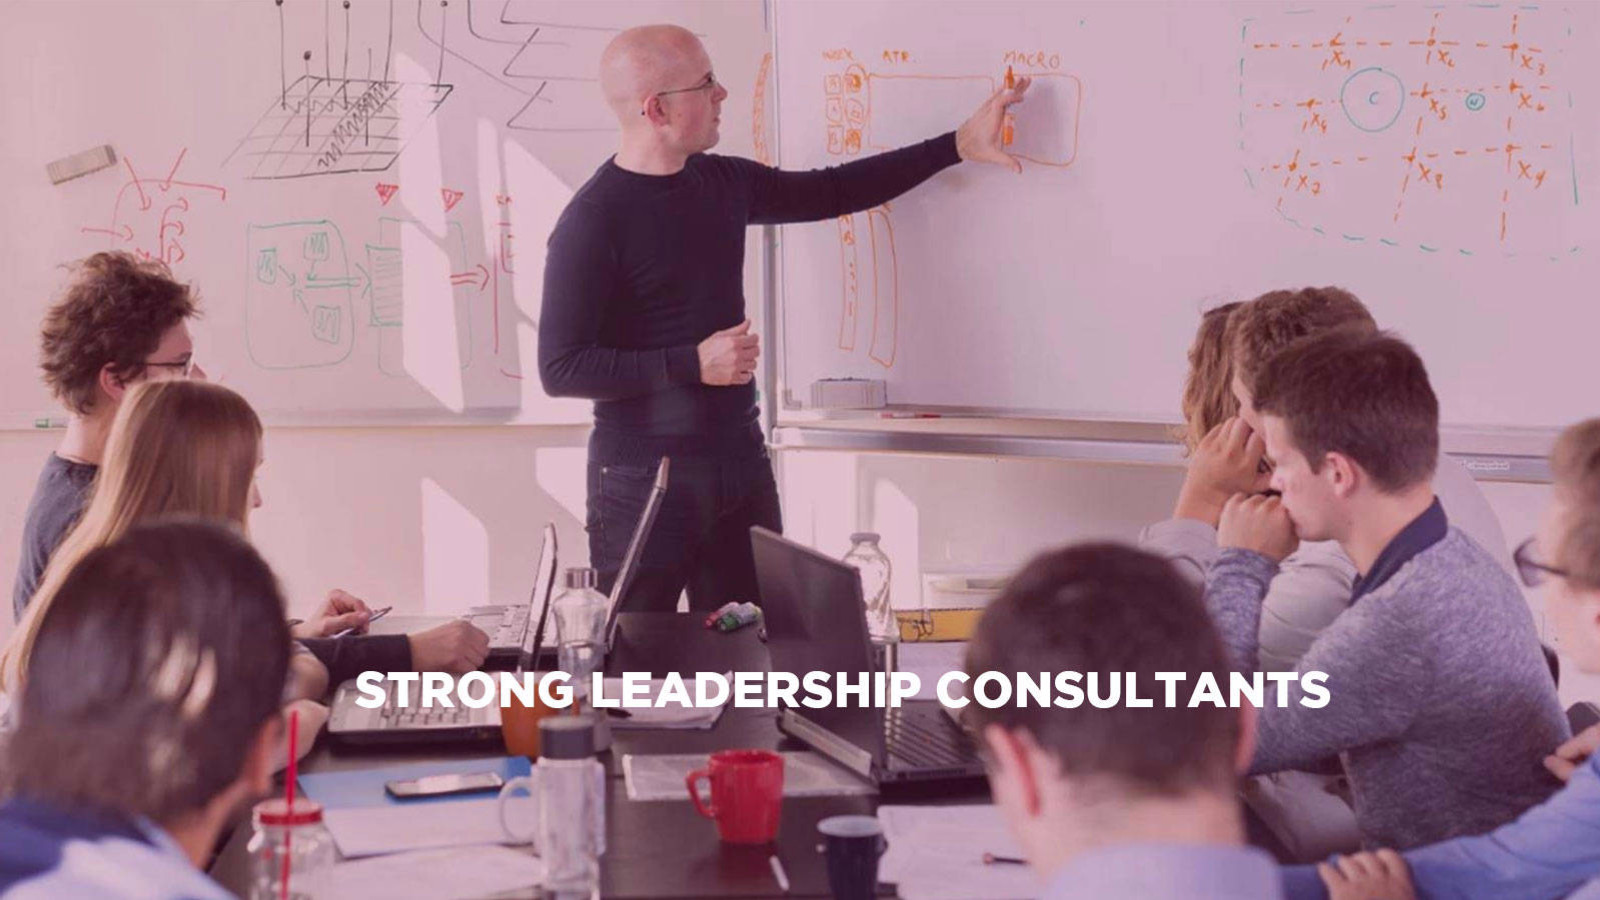 STRONG LEADERSHIPS CONSULTANTS